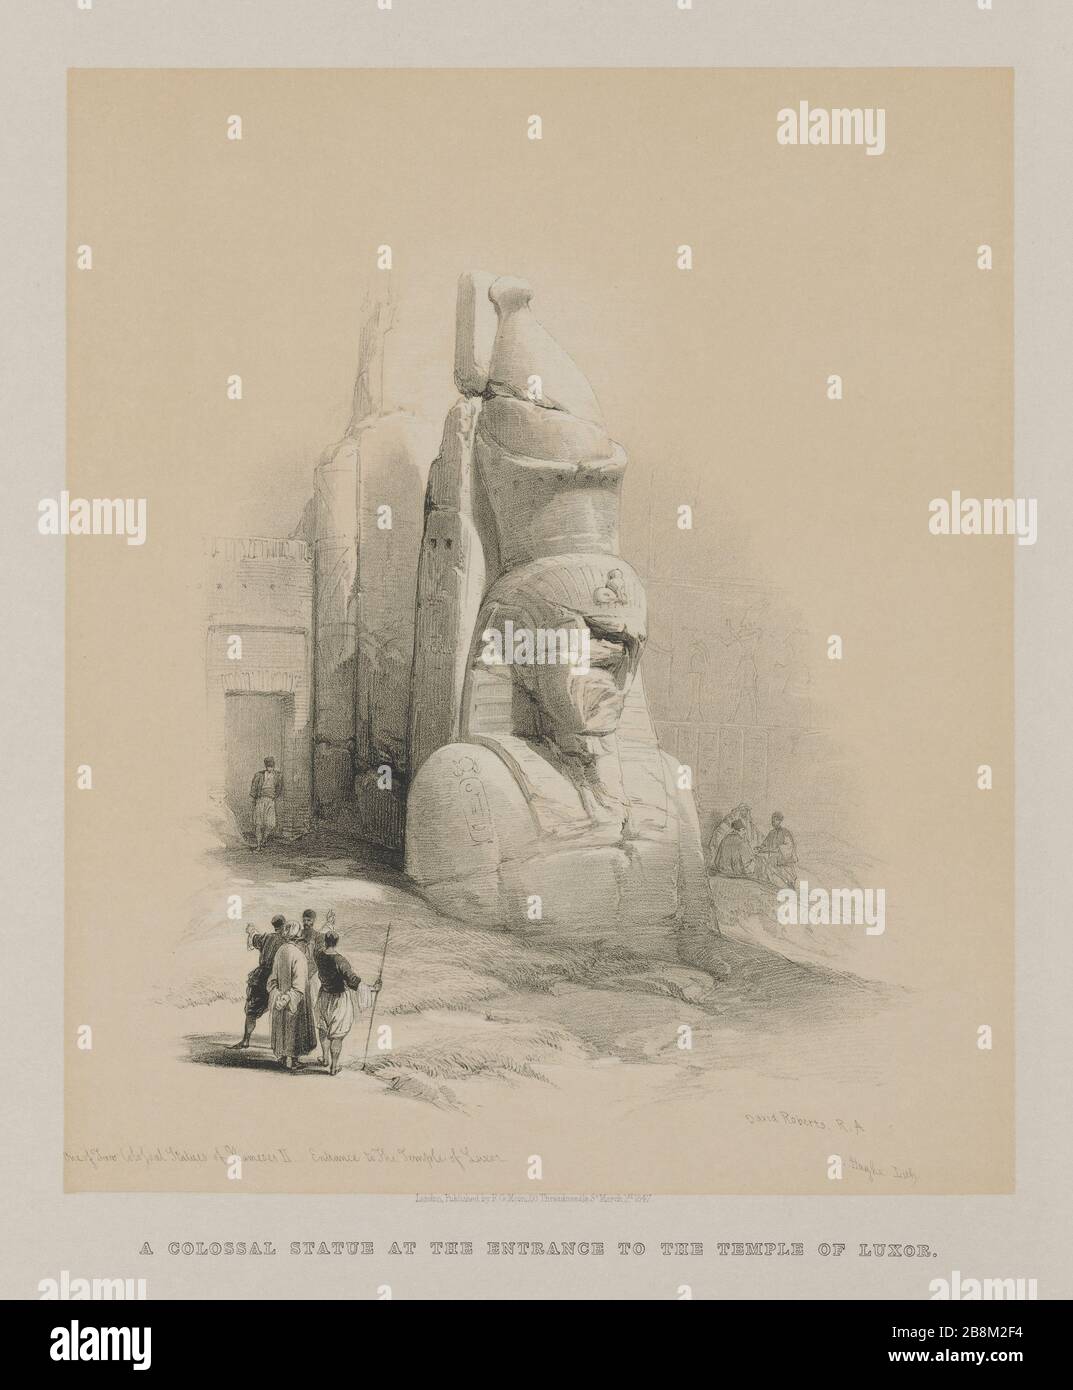 One of Two Colossal Statues of Rameses II. Entrance to the Temple of Luxor from Egypt and Nubia, Volume I: One of Two Colossal Statues of Rameses II. Entrance to the Temple of Luxor, 1847. Louis Haghe (British, 1806-1885), F.G.Moon, 20 Threadneedle Street, London, after David Roberts (British, 1796-1864). Color lithograph; Stock Photo